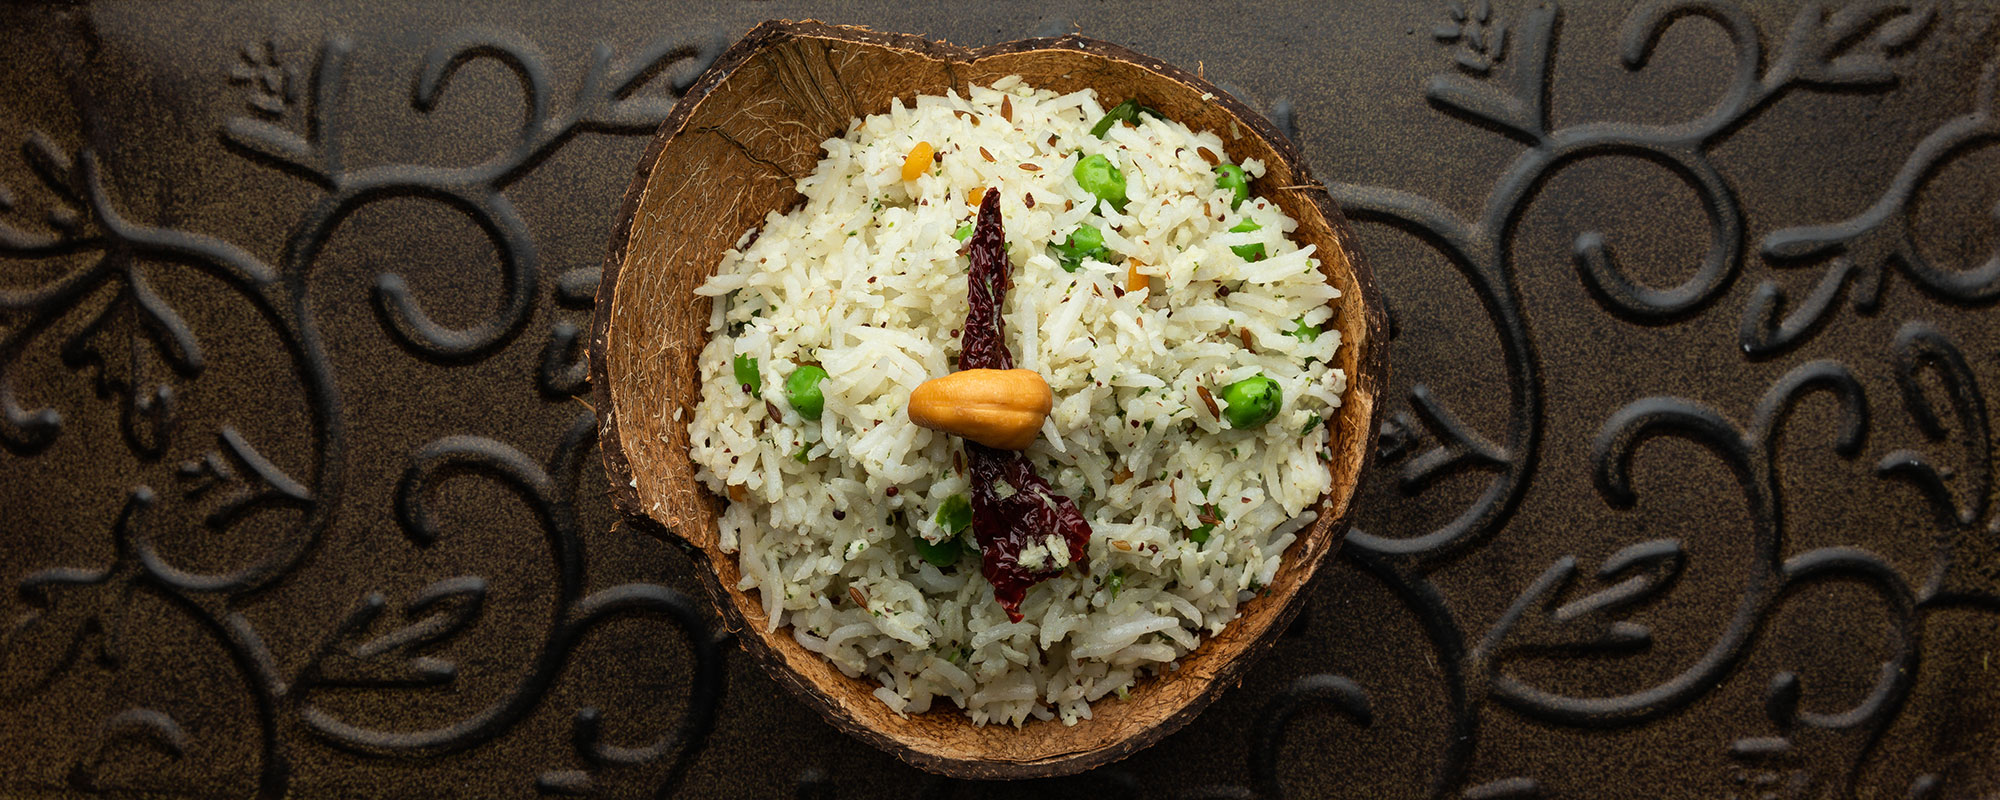 A Twist on a South Indian Classic: How to Make Suresh Bhamidimarri’s Mint-Infused Coconut Rice